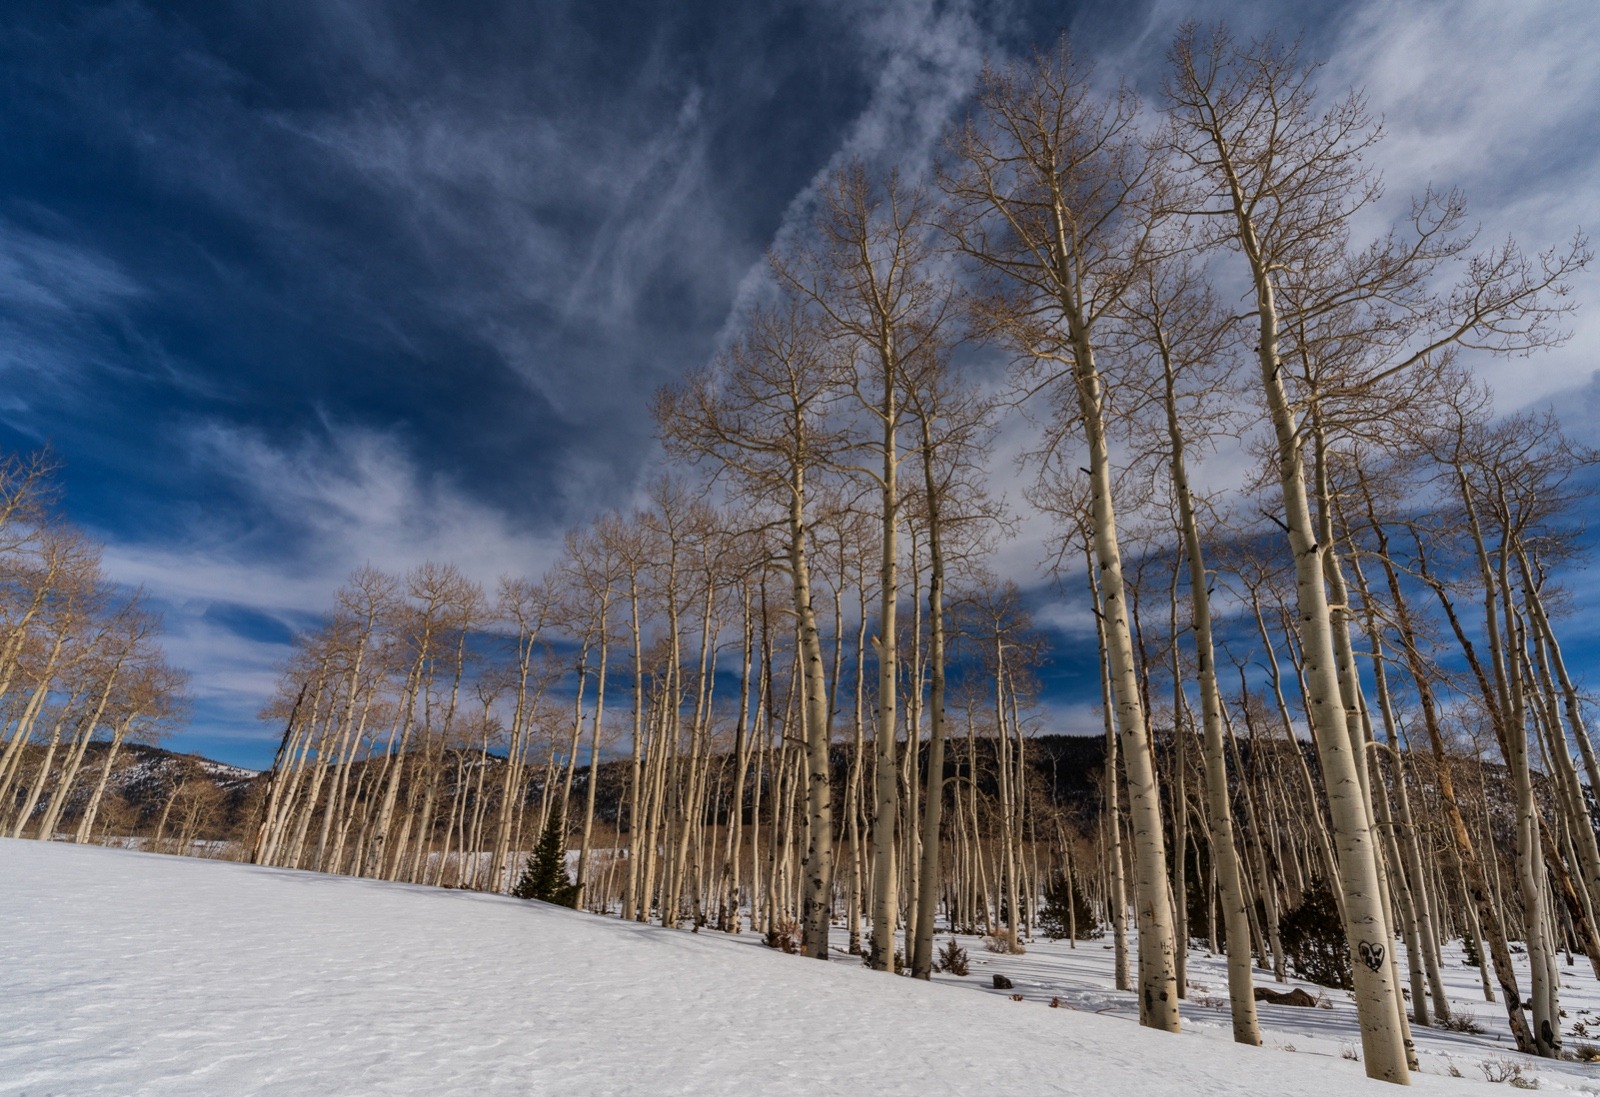 Winter Ghosts: Winter in Pando highlights summer's impact from foraging deer and cattle. Here, only elderly trees remain, leaving architectural voids as an indication of a grove compromised, processes severed, and stewardship unmet. Photo by Lance Oditt